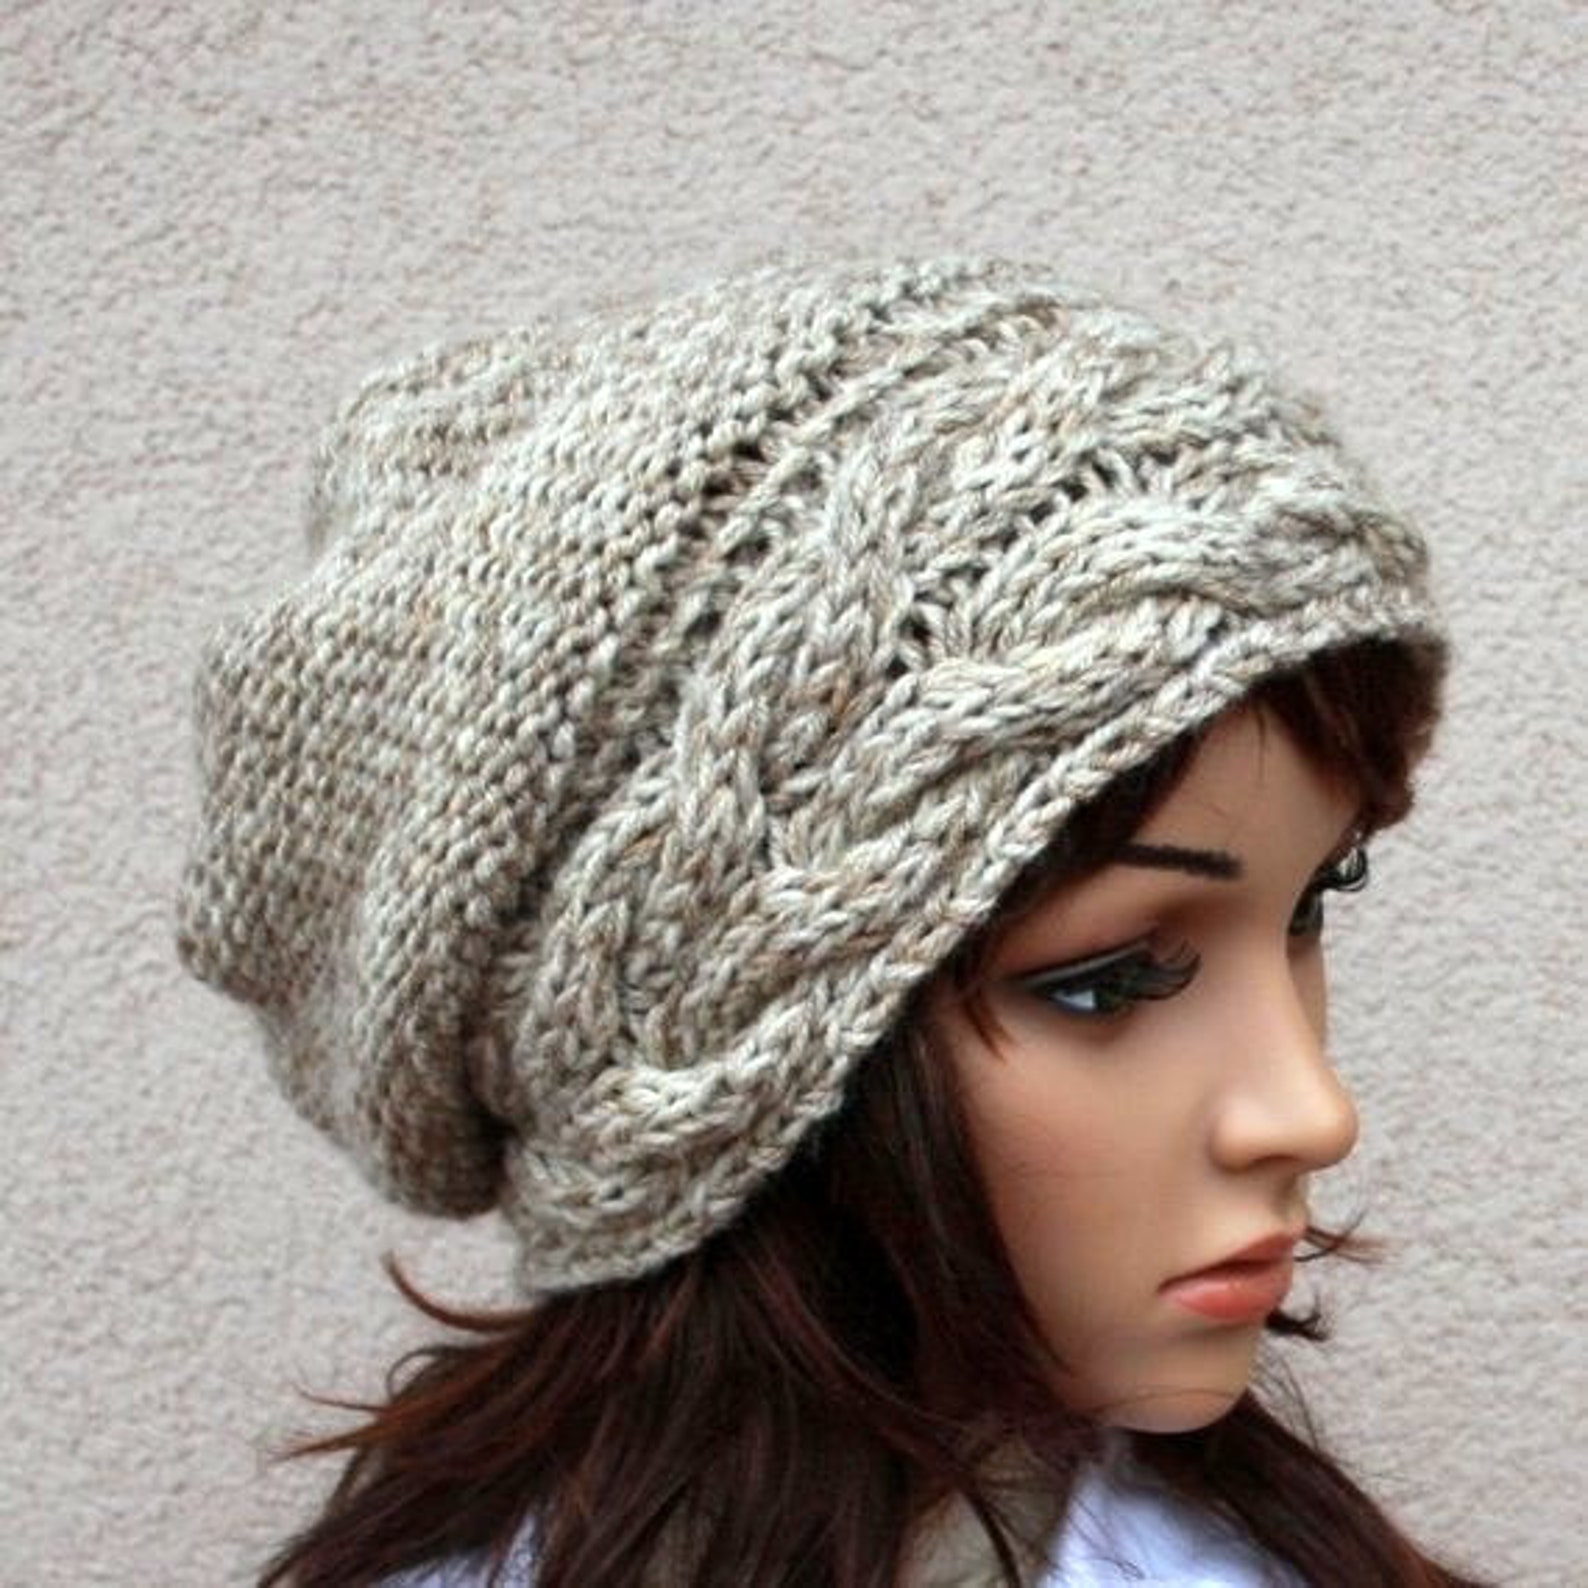 Hand Knitted Warm Slouchy Beanie. Soft and Comfortable Hat | Etsy